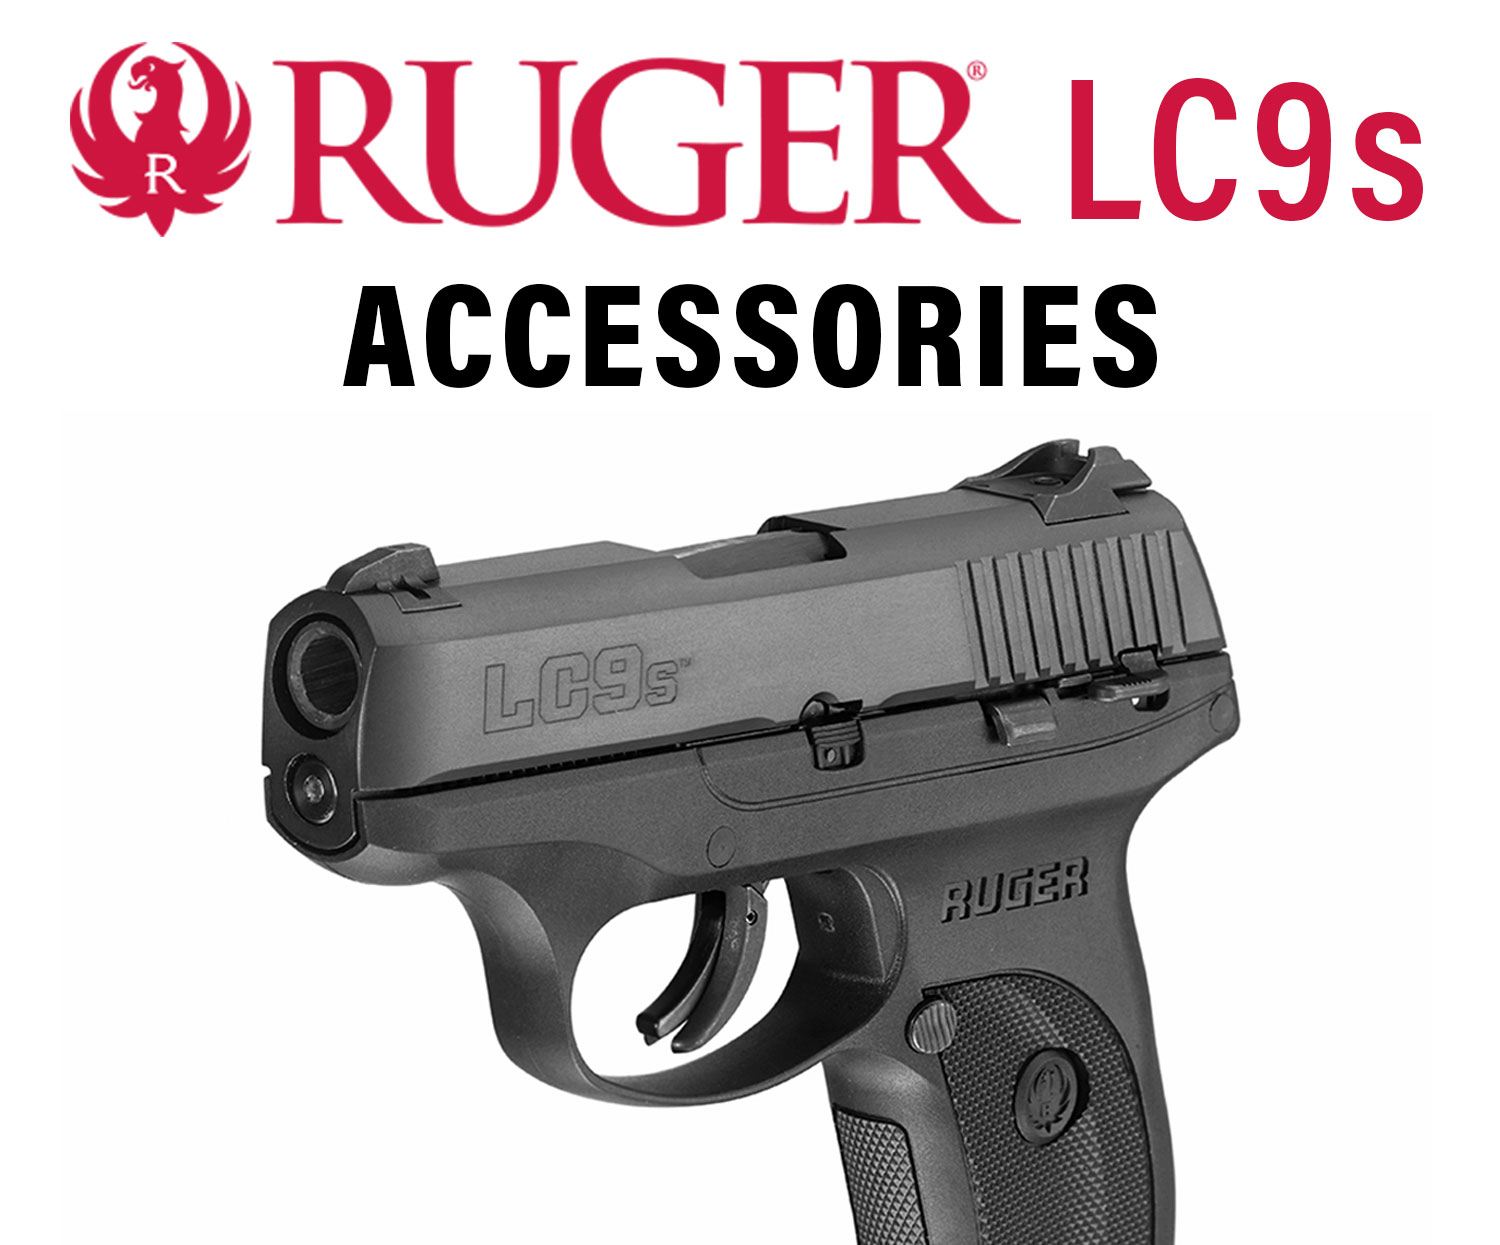 Ruger LC9s Accessories - Ruger EC9s Accessories